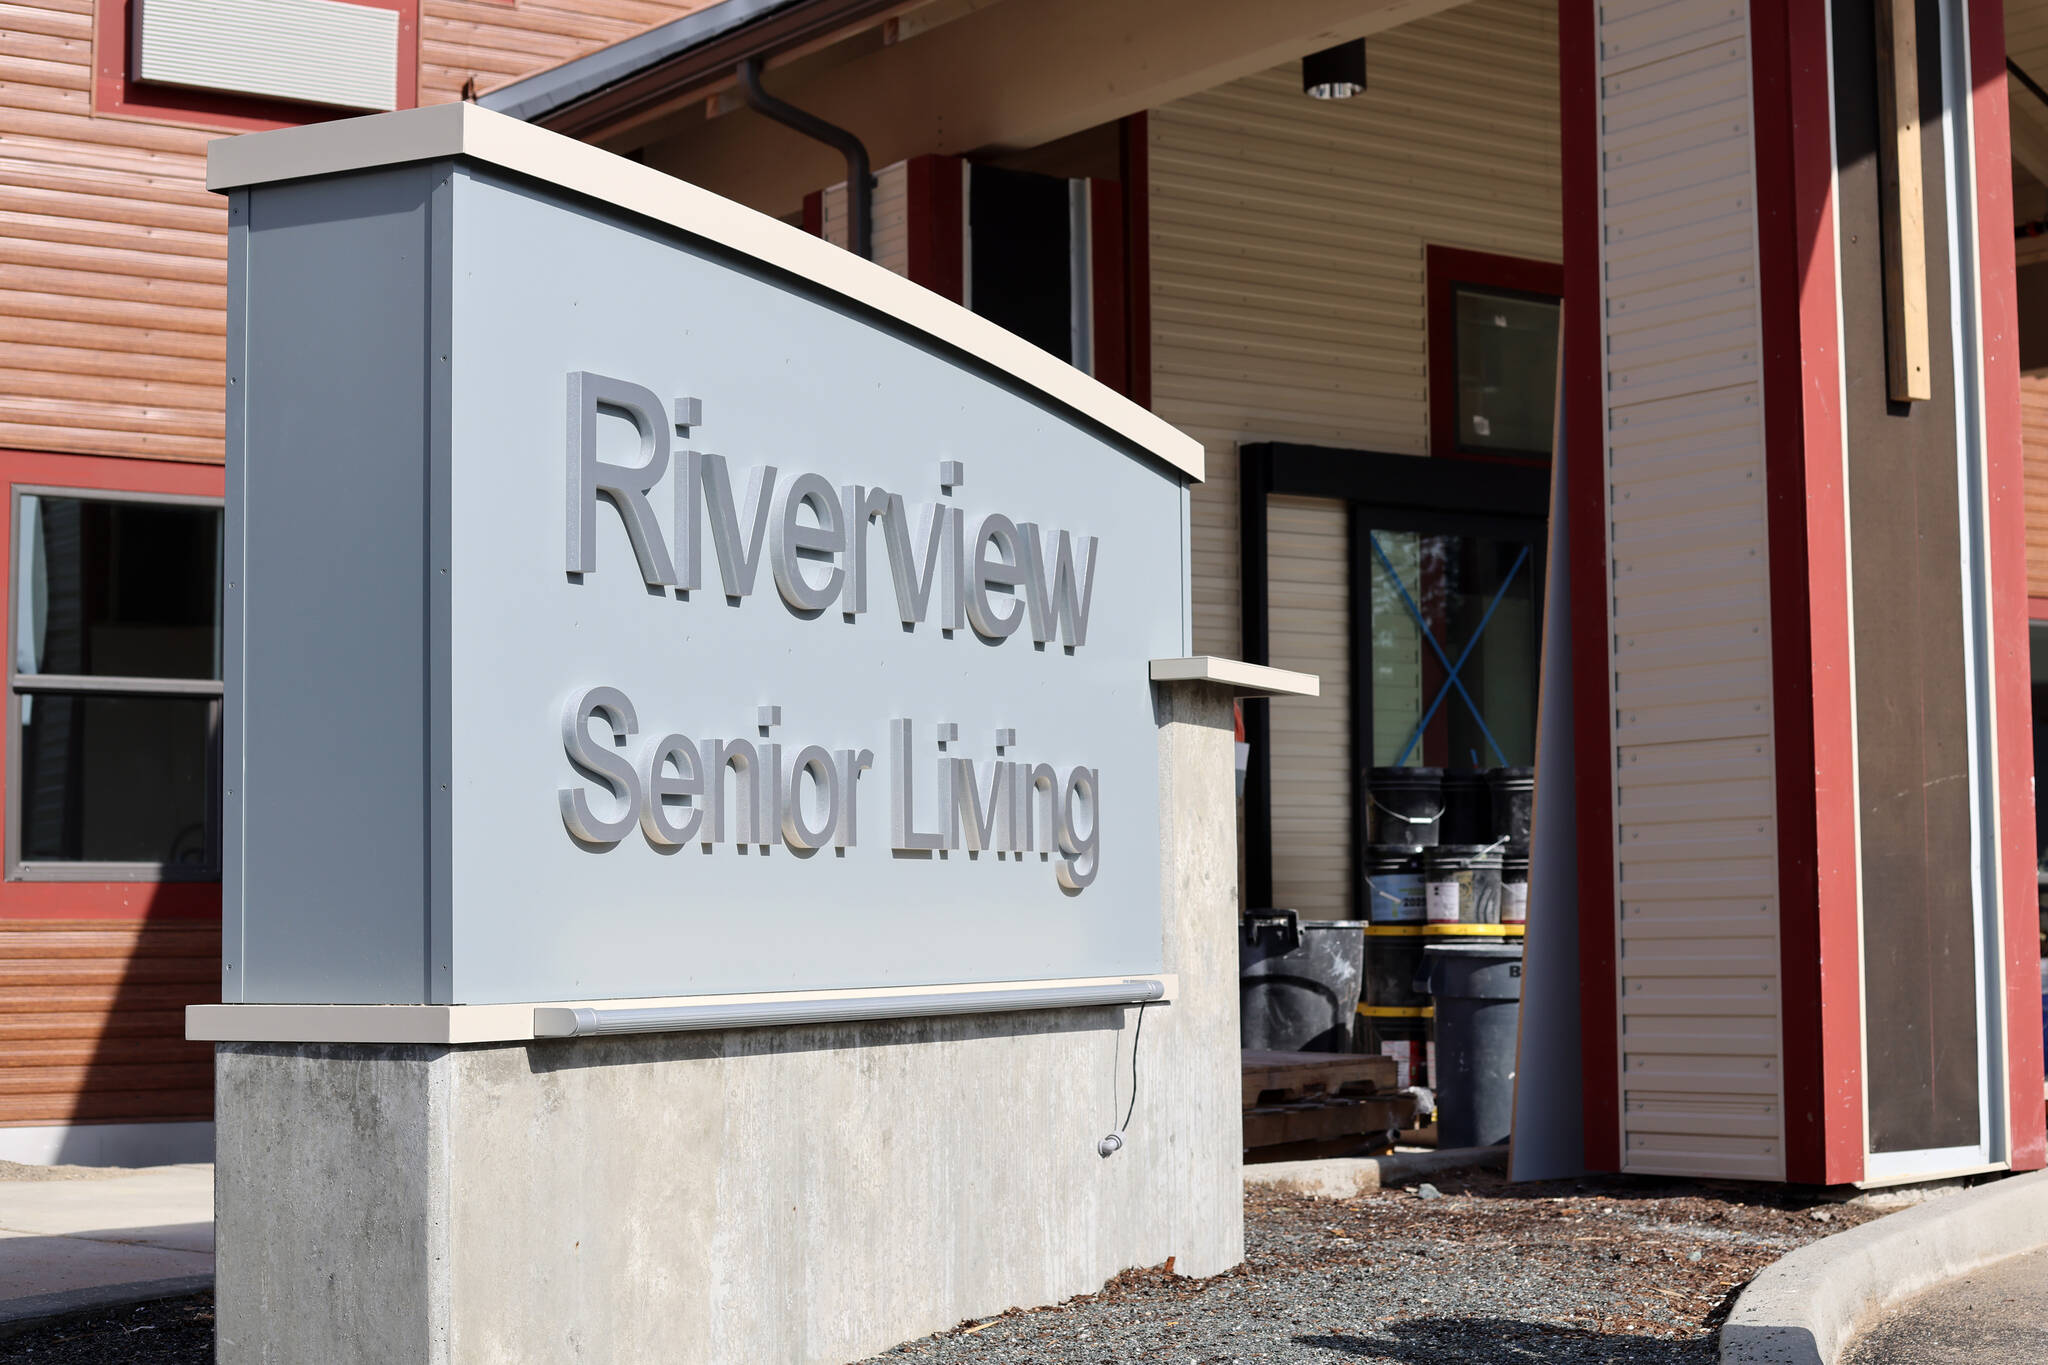 Sun shines on a sign outside of Riverview Senior Living, an assisted-living community expected to welcome move-ins in early May. Ahead of that, a public event featuring Riverview’s team of directors will be held Saturday at the Baranof Dowtnown. (Ben Hohenstatt / Juneau Empire)